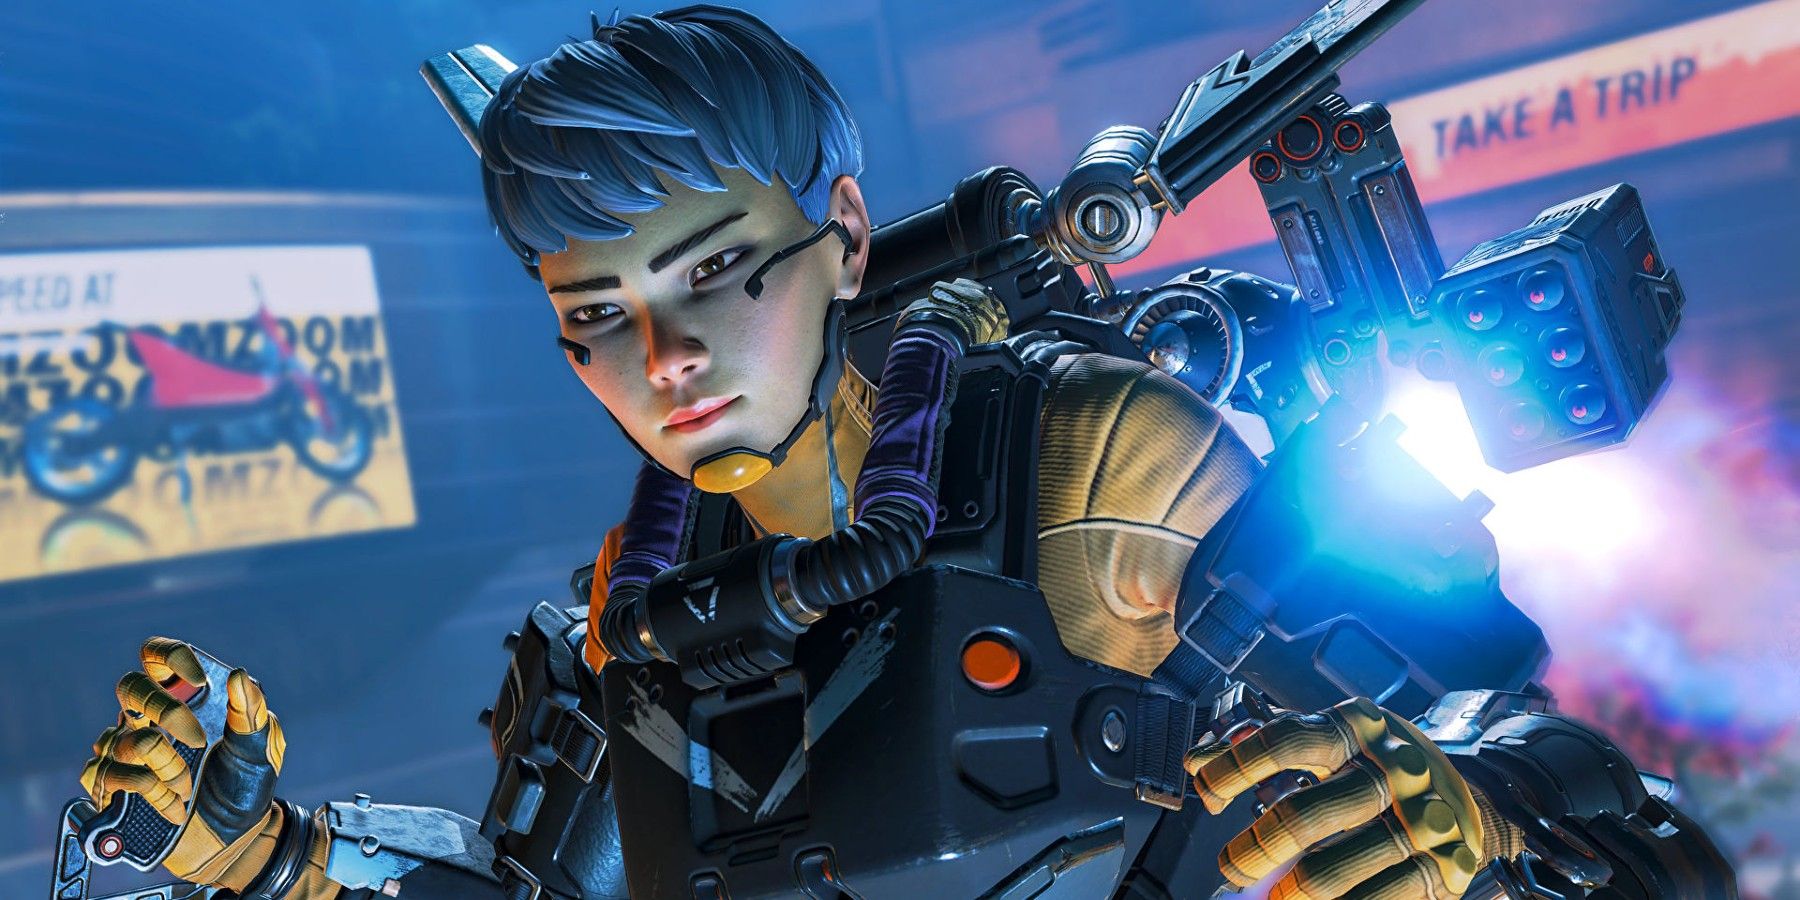 Apex Legends Valkyrie Glitch gives players access to the hidden Kings Canyon cave system